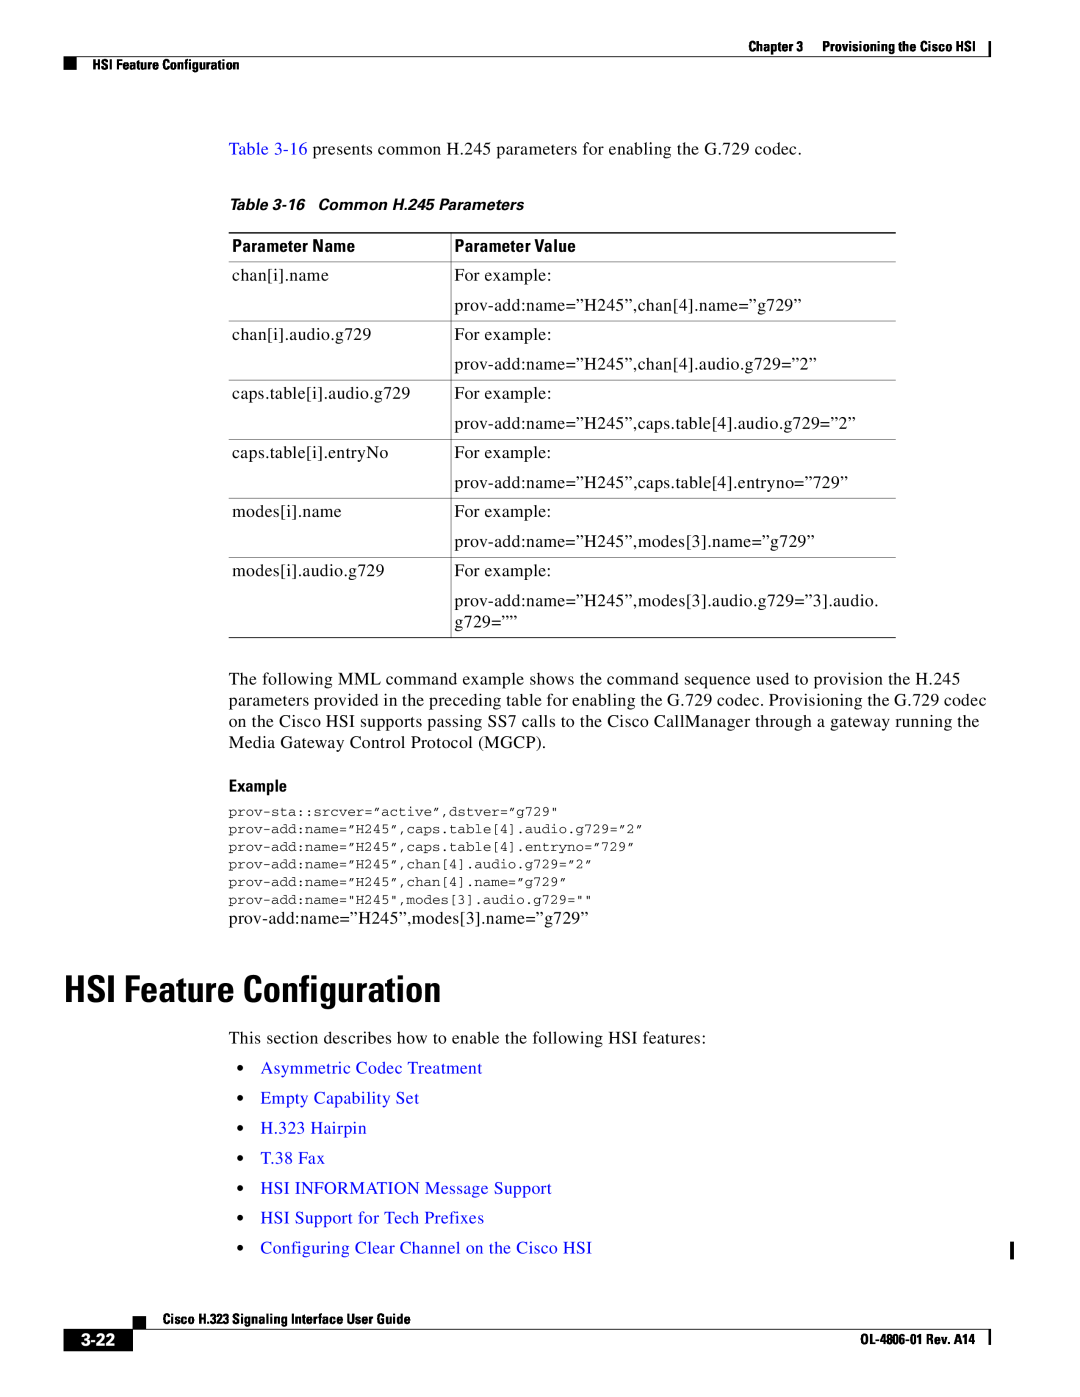 Cisco Systems HSI Feature Configuration, Asymmetric Codec Treatment Empty Capability Set H.323 Hairpin, 3-22, Example 